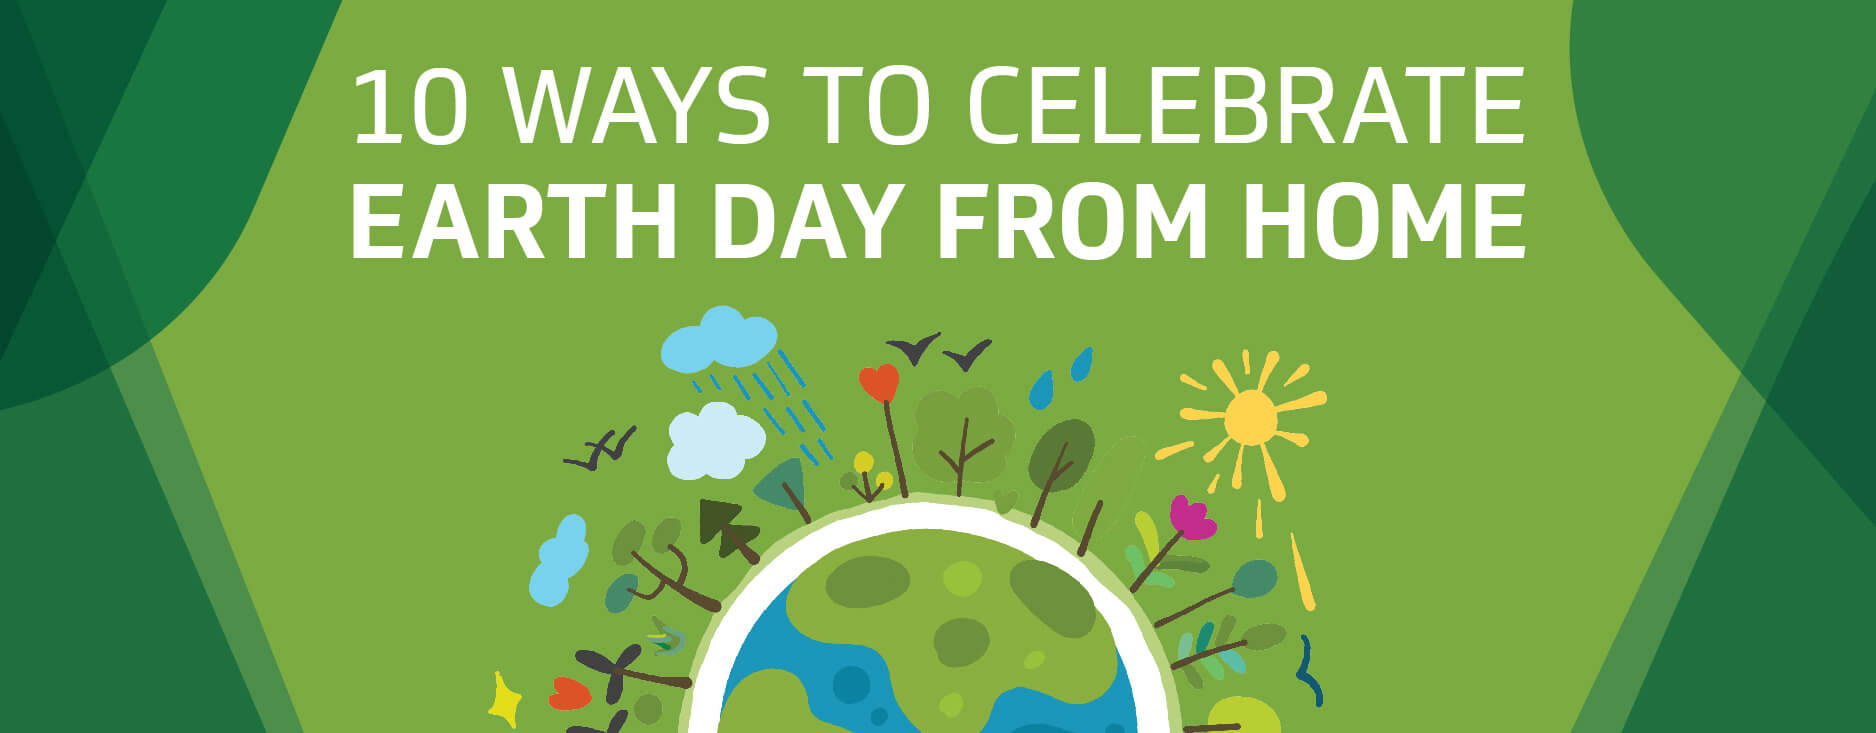 10 Ways to Celebrate Earth Day From Home